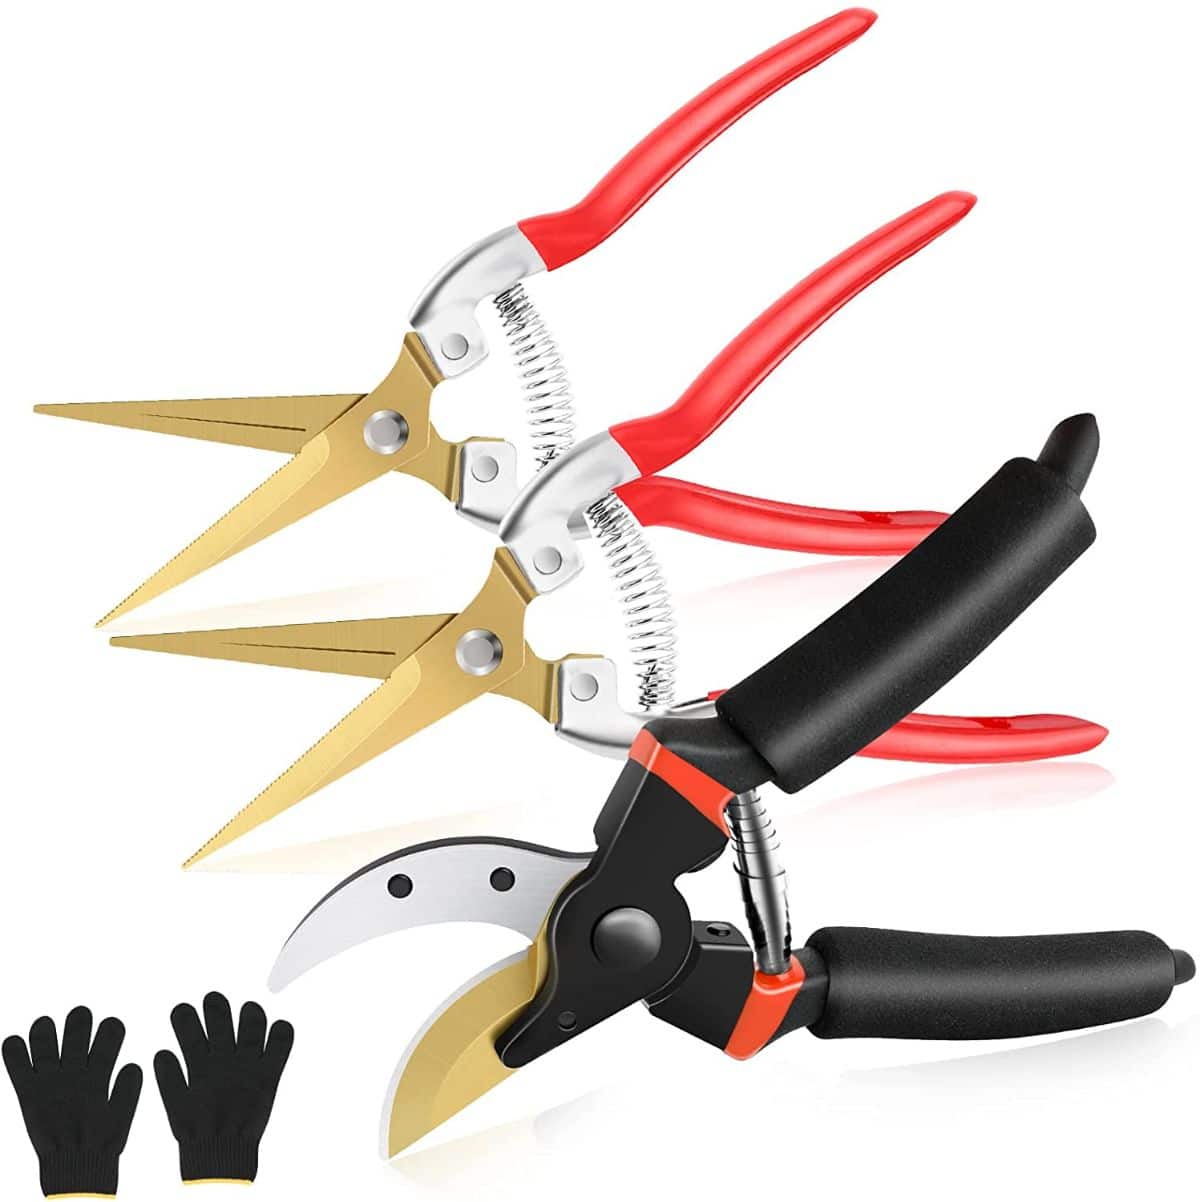 Handheld garden shears are a garden must have